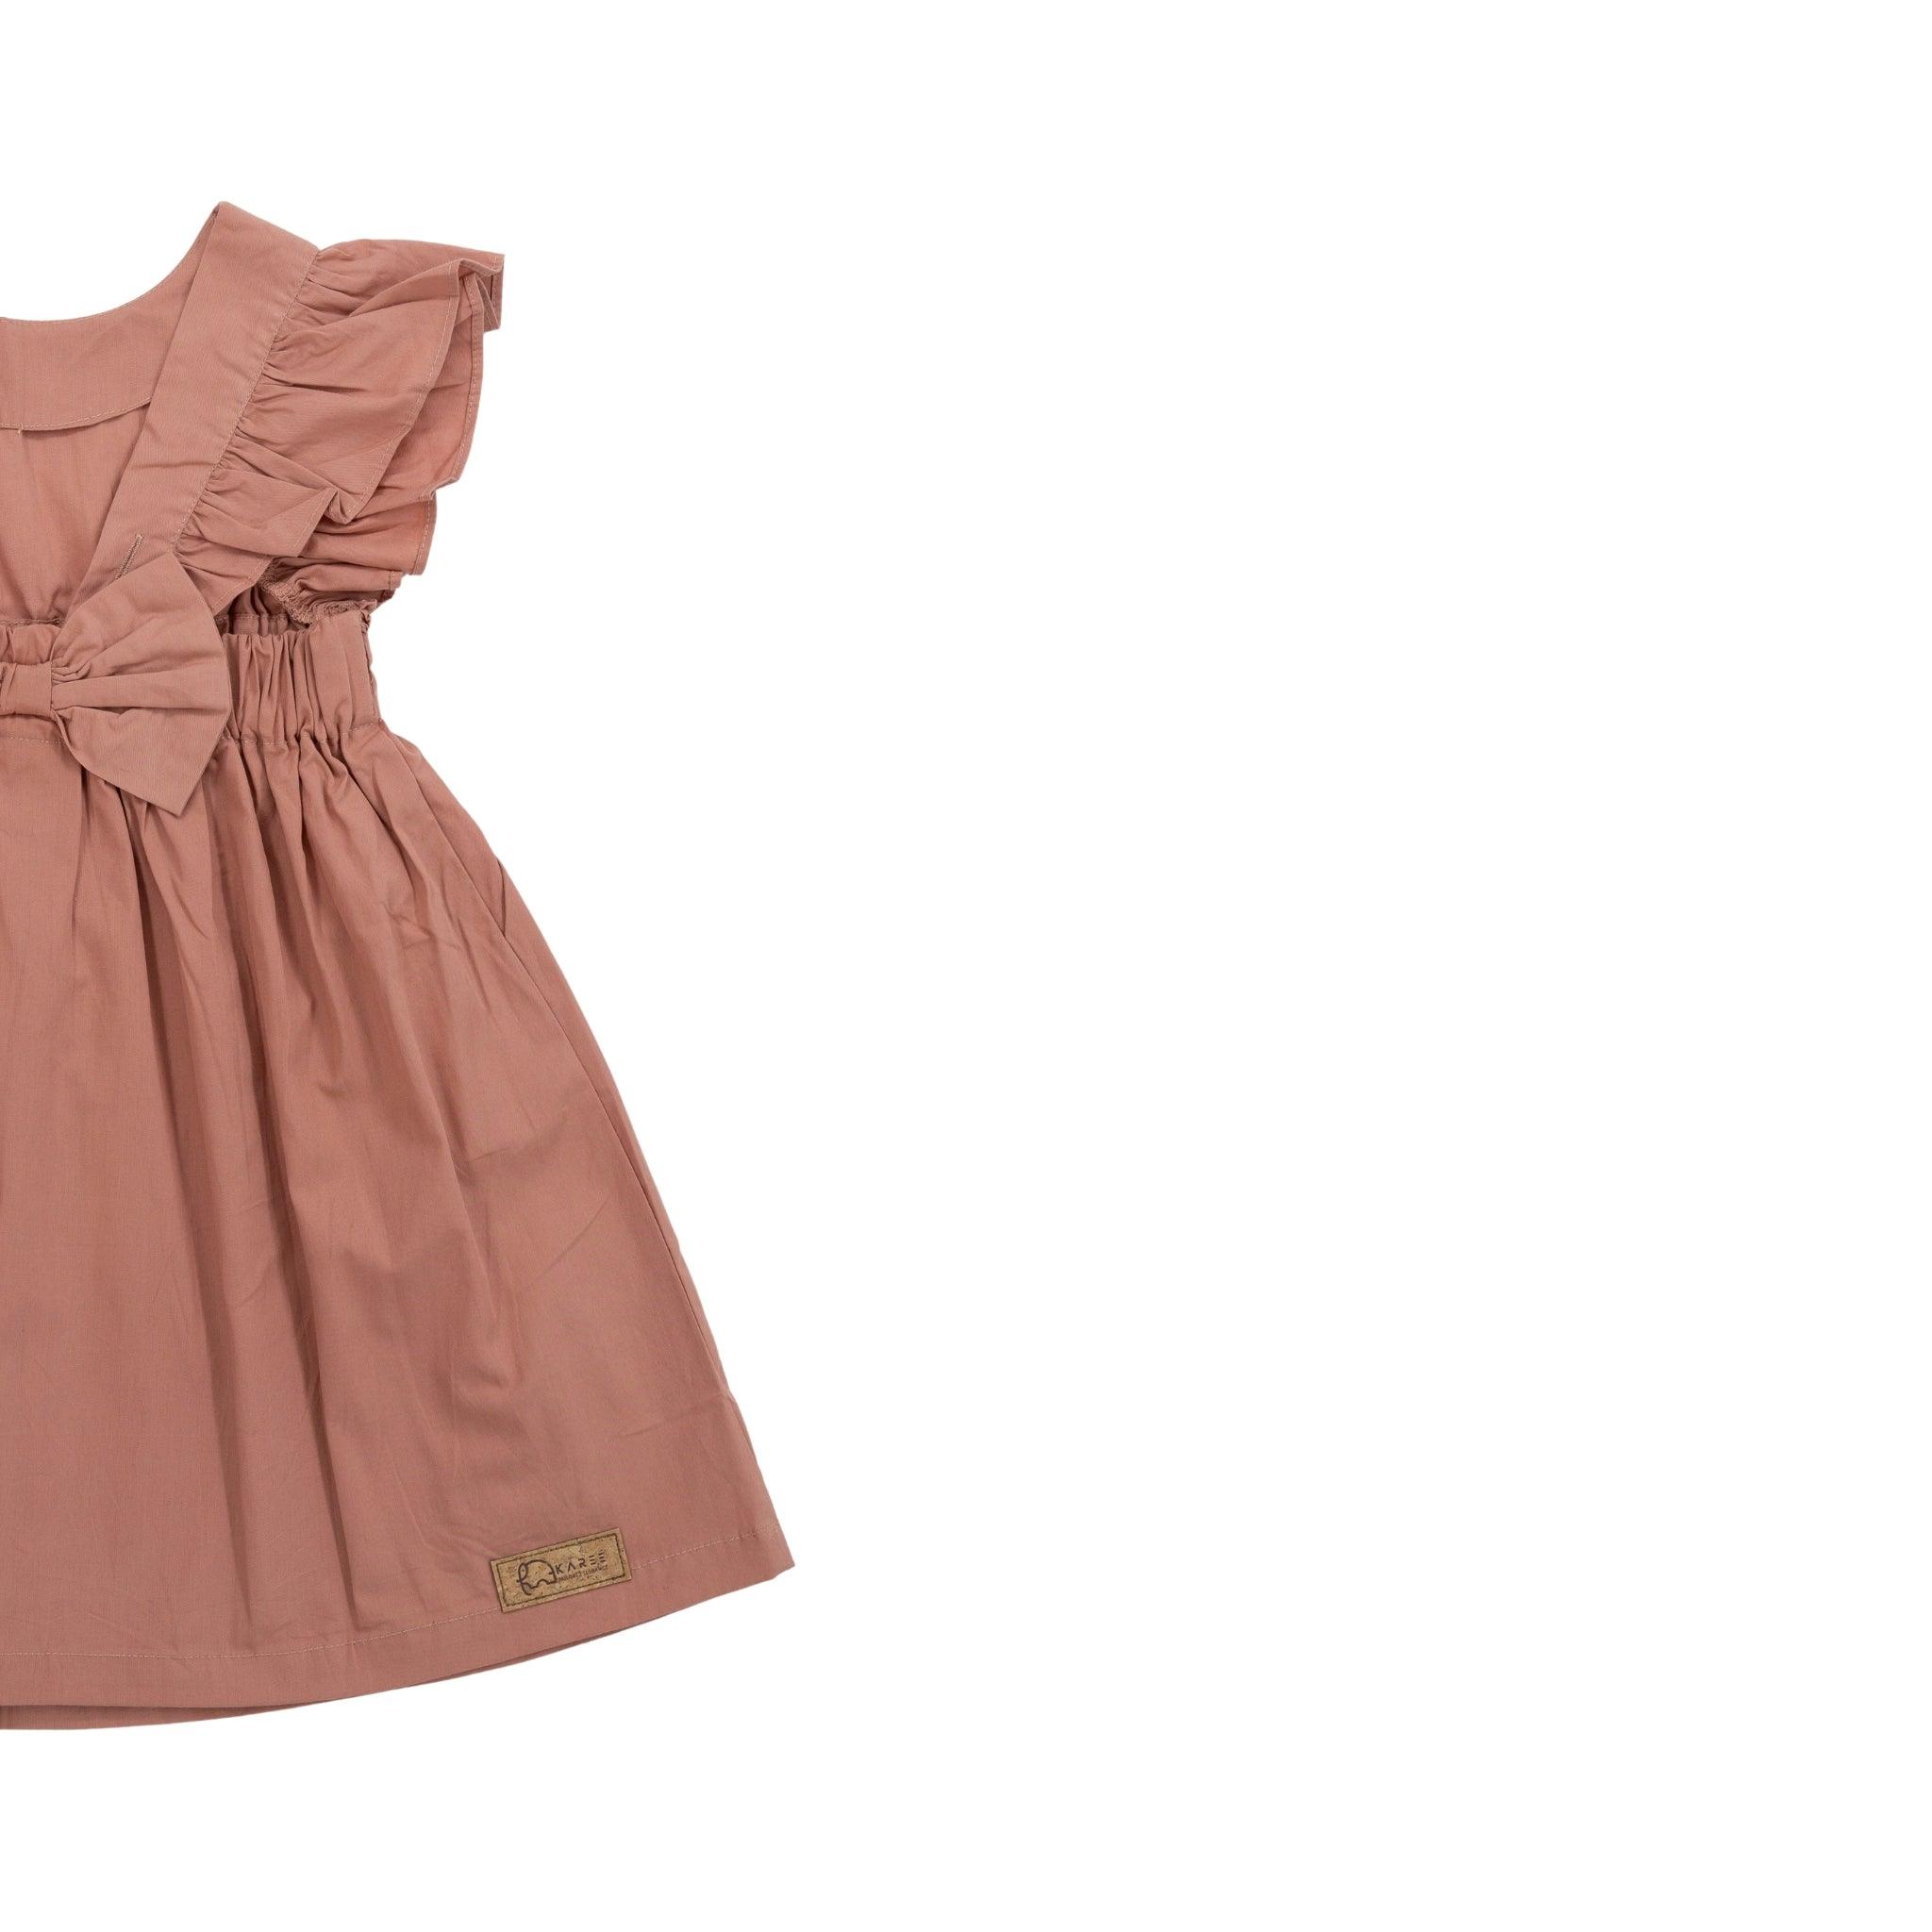 A Brick Dust Cotton Floral Dress for Girls from Karee, with a ruffled sleeve and a bow at the waist, displayed against a white background.